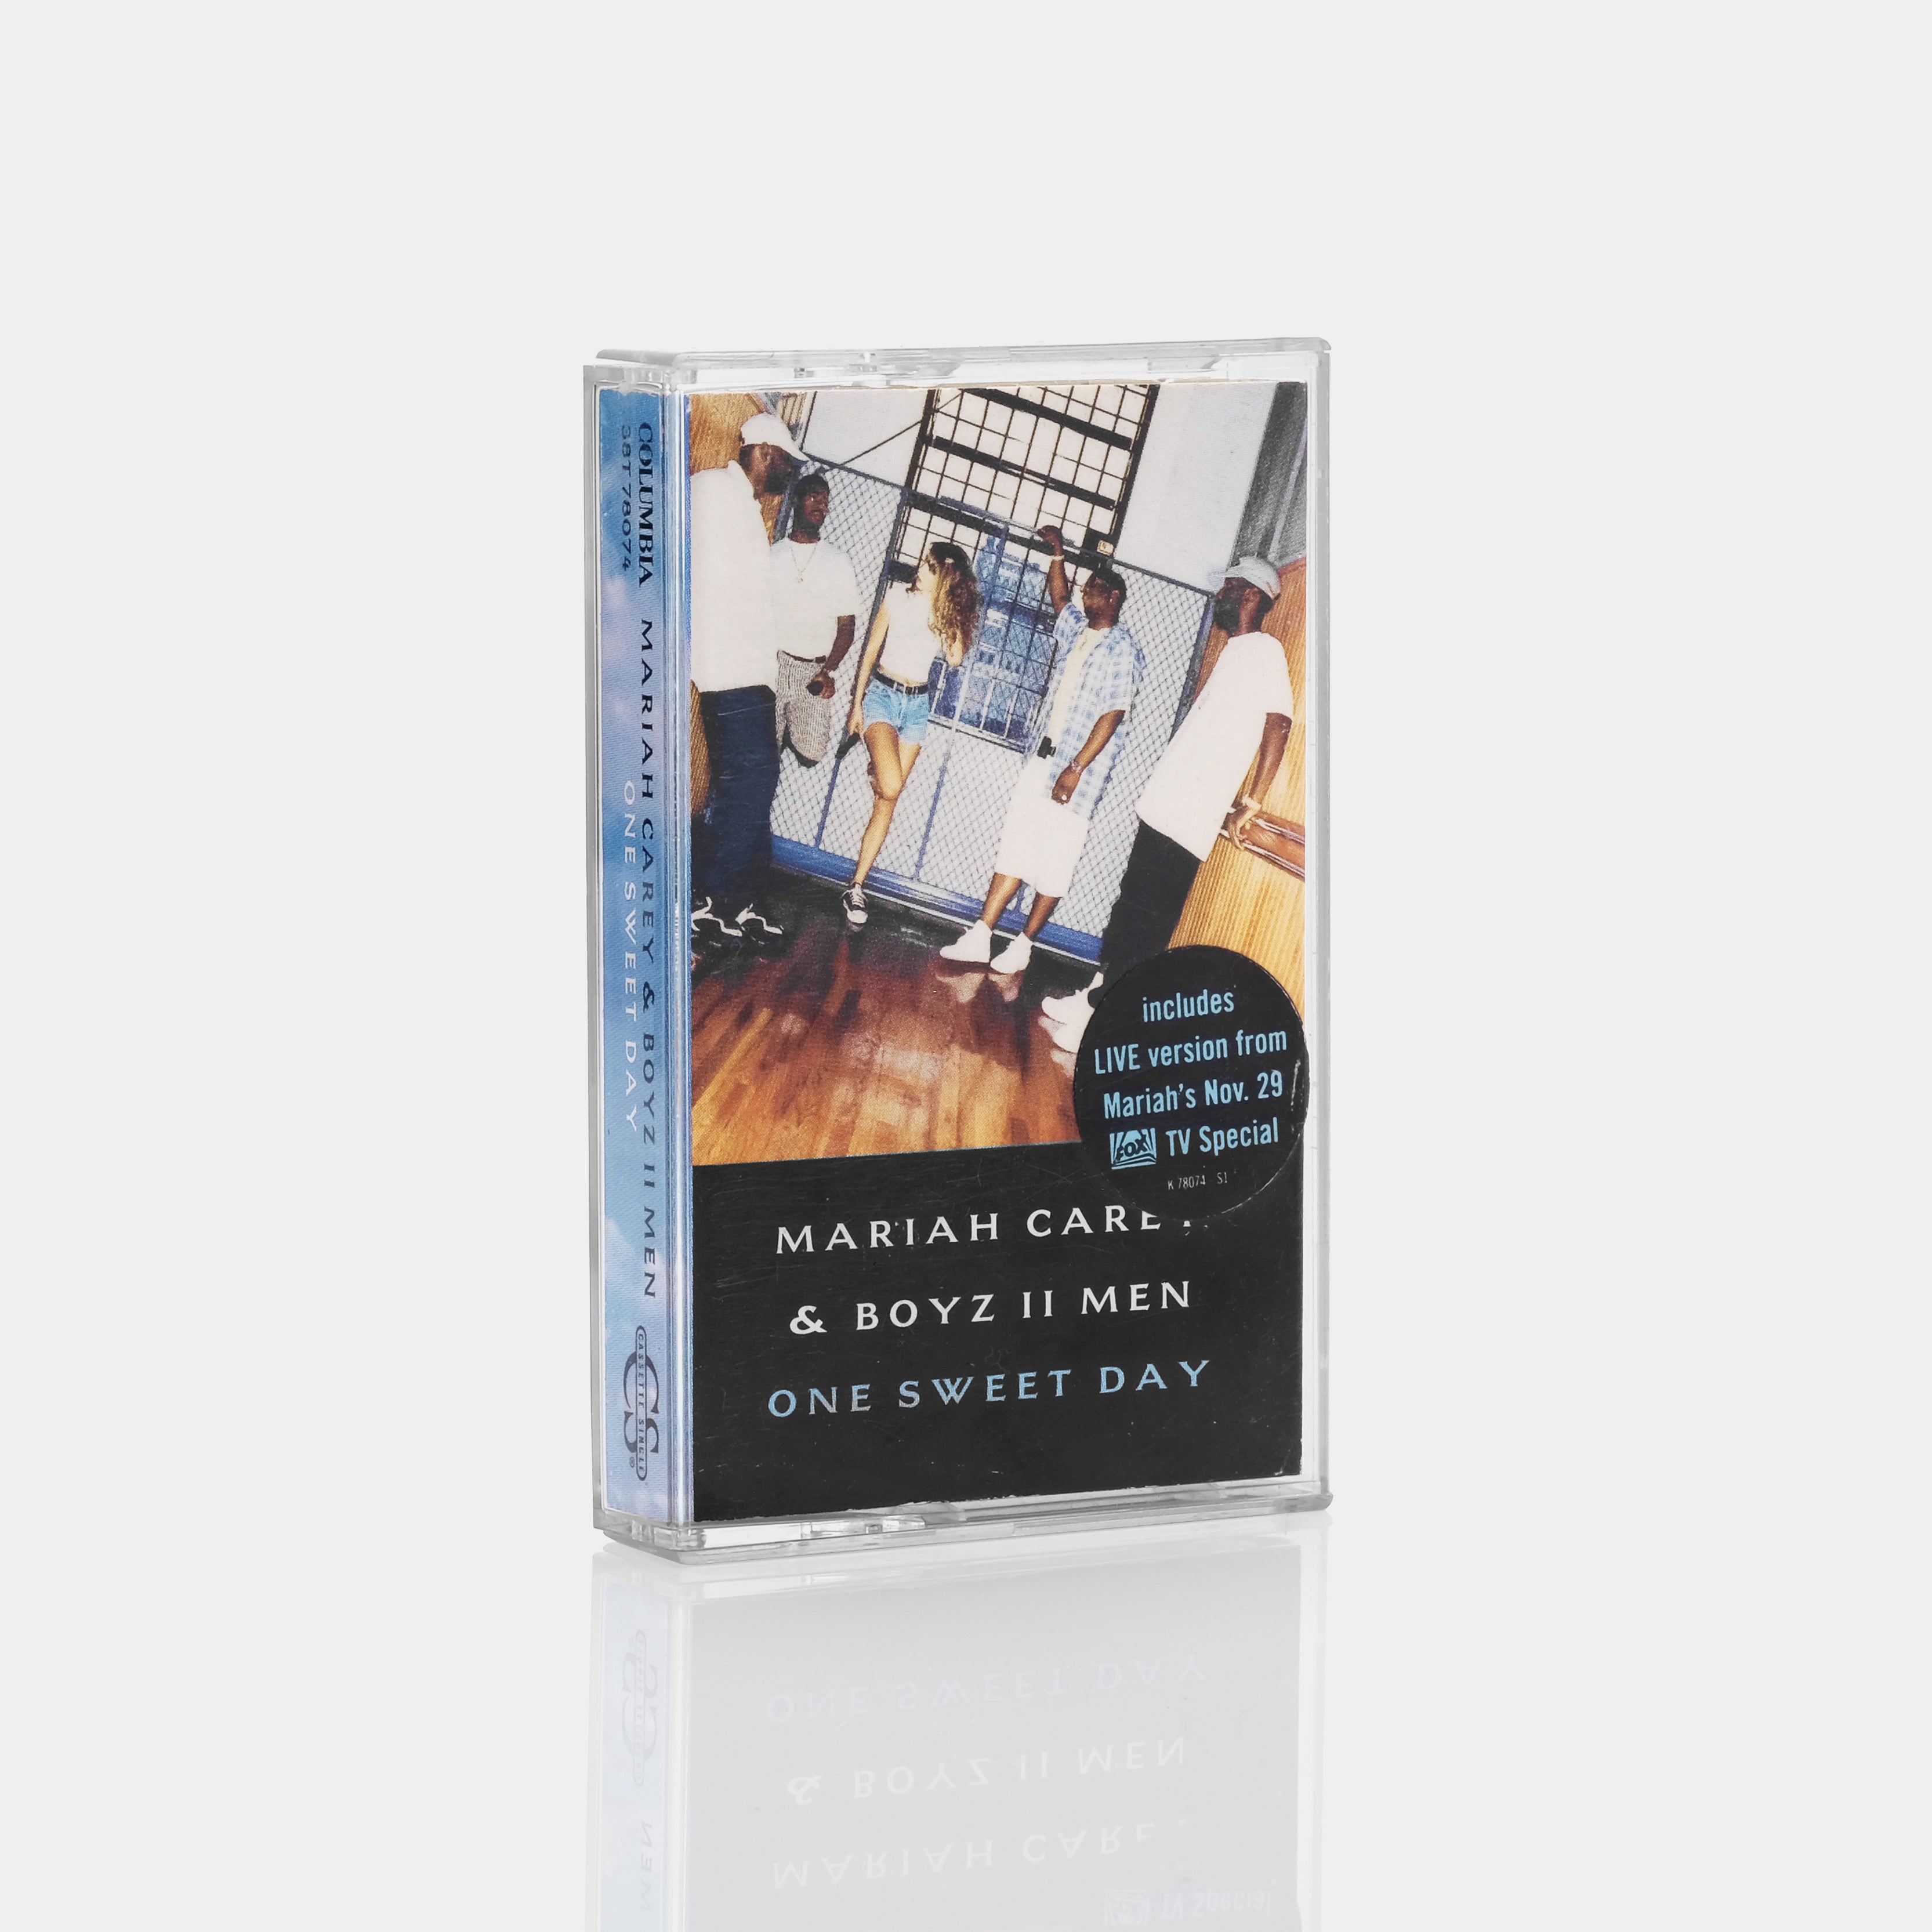 Mariah Carey - One Sweet Day Cassette Tape